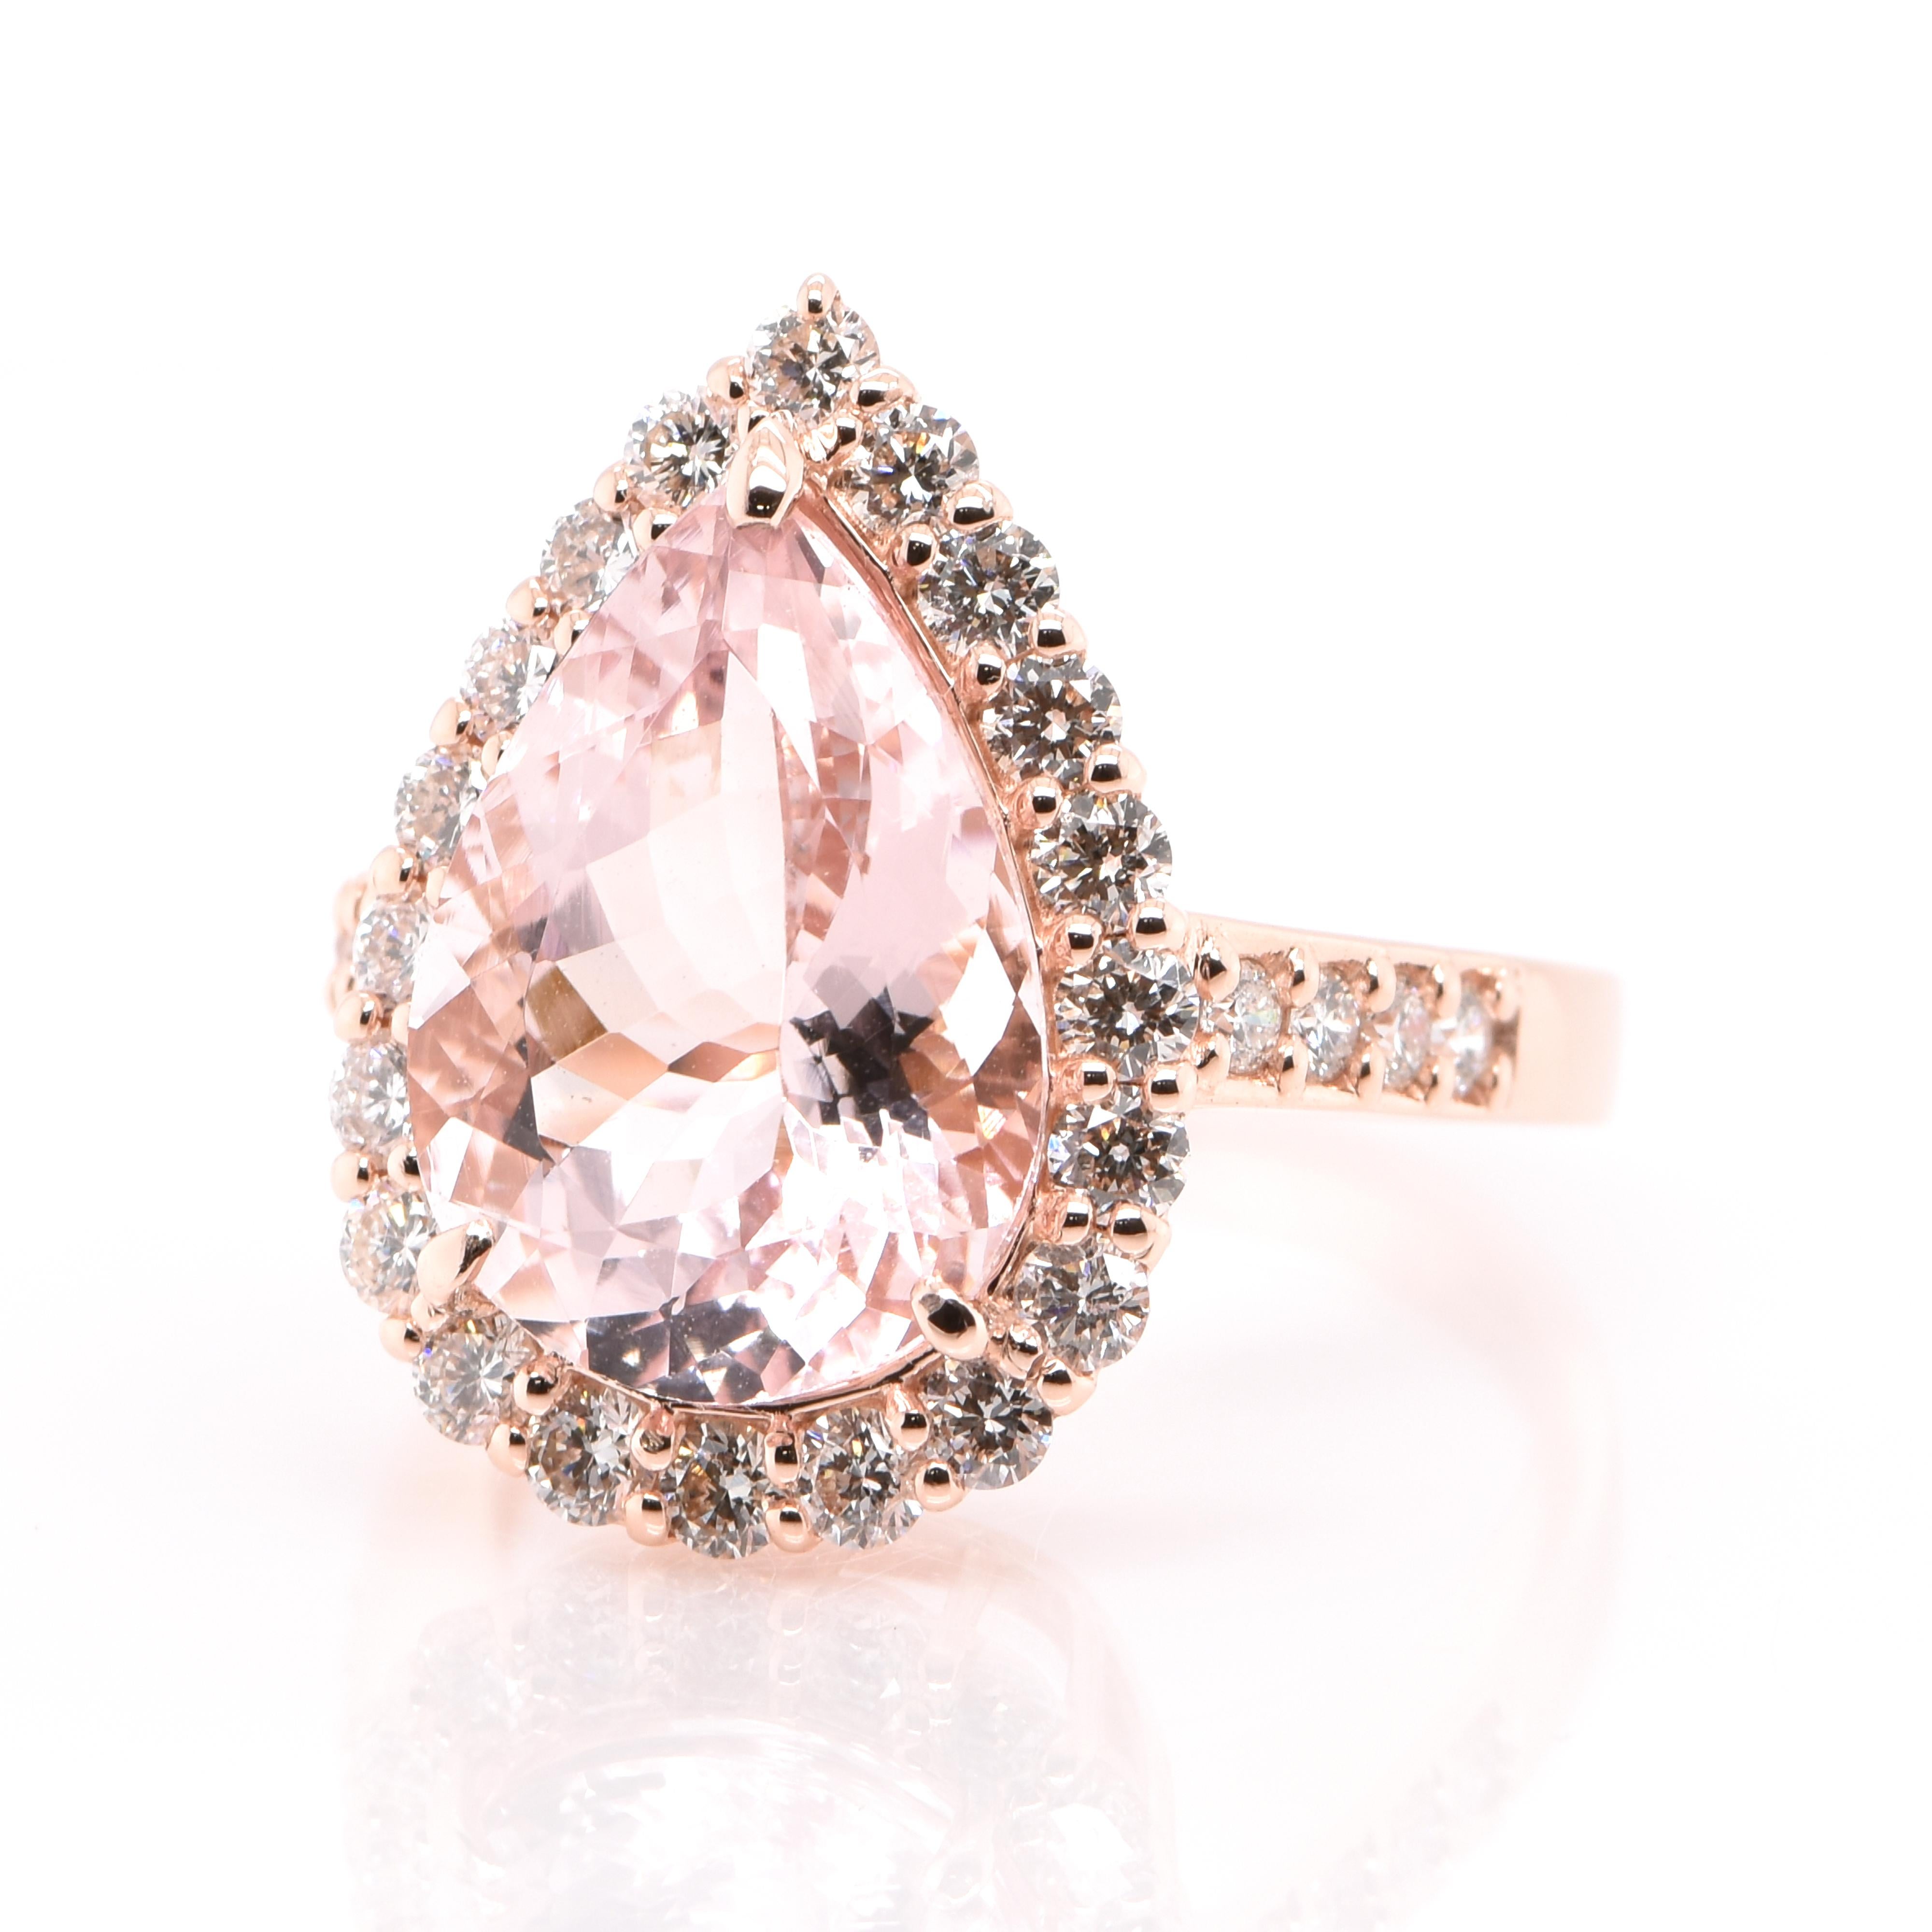 A beautiful Cocktail Ring featuring a 4.74 Carat, Natural Morganite (Pink Beryl) and 0.95 Carats of Diamond Accents set in 18 Karat Rose Gold. Having been first discovered in the early 1900s, Morganite was named after the famed banker and gem